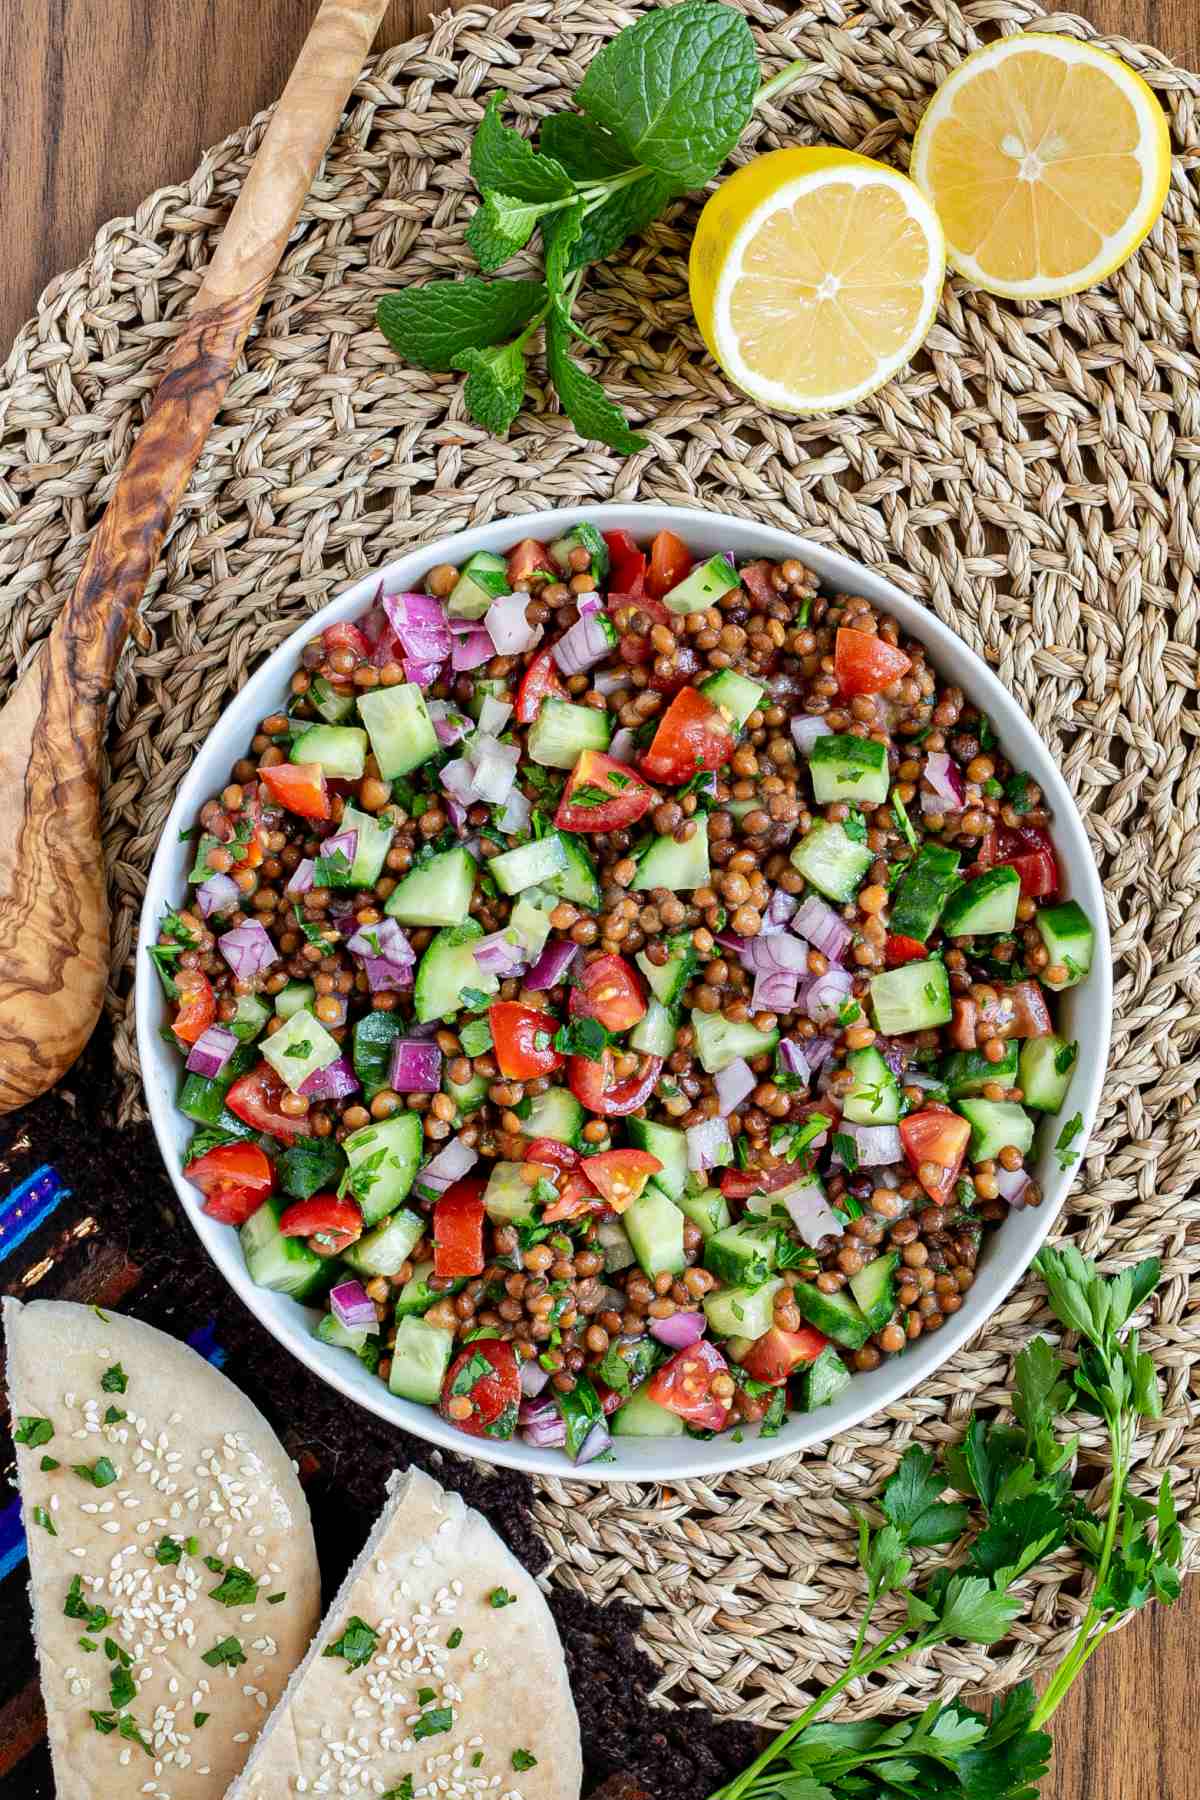 Large white bowl with a chopped mixed salad of brown lentils, cucumber, tomatoes, and red onion.